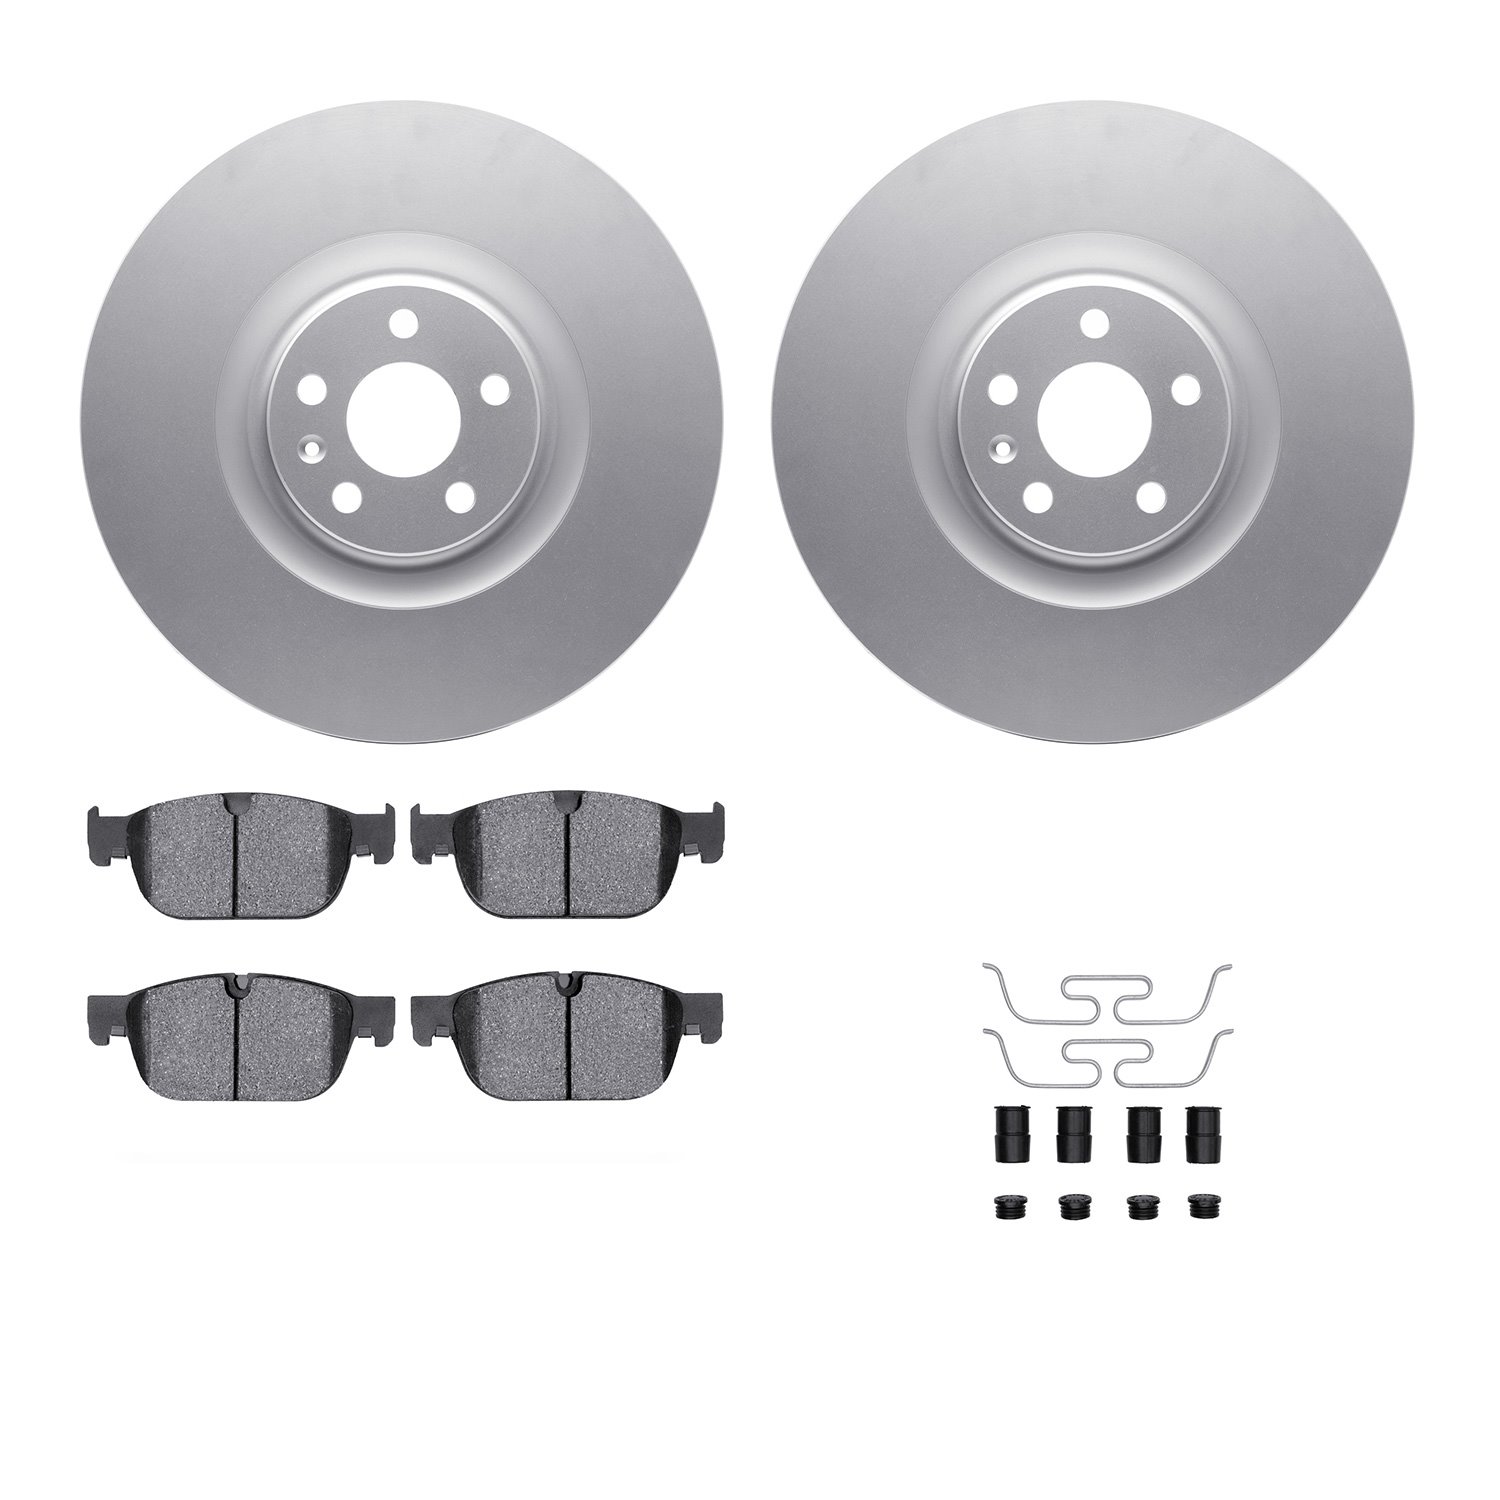 4312-27042 Geospec Brake Rotors with 3000-Series Ceramic Brake Pads & Hardware, Fits Select Volvo, Position: Front